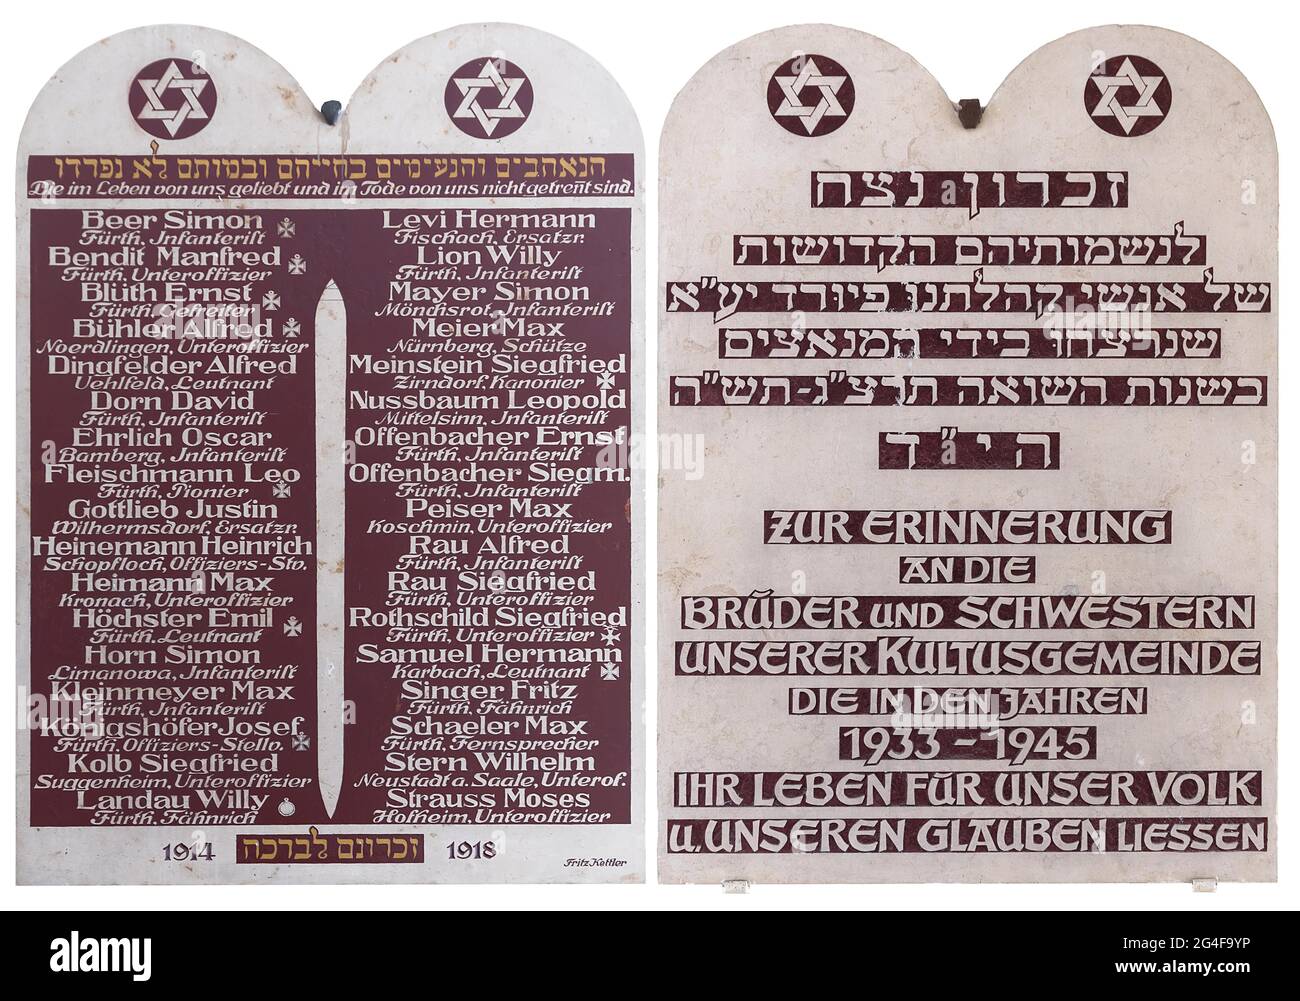 Commemorative plaques of the fallen in the First World War, on the right commemorative plaque for the Jewish victims of the Nazi dictatorship, in the Stock Photo